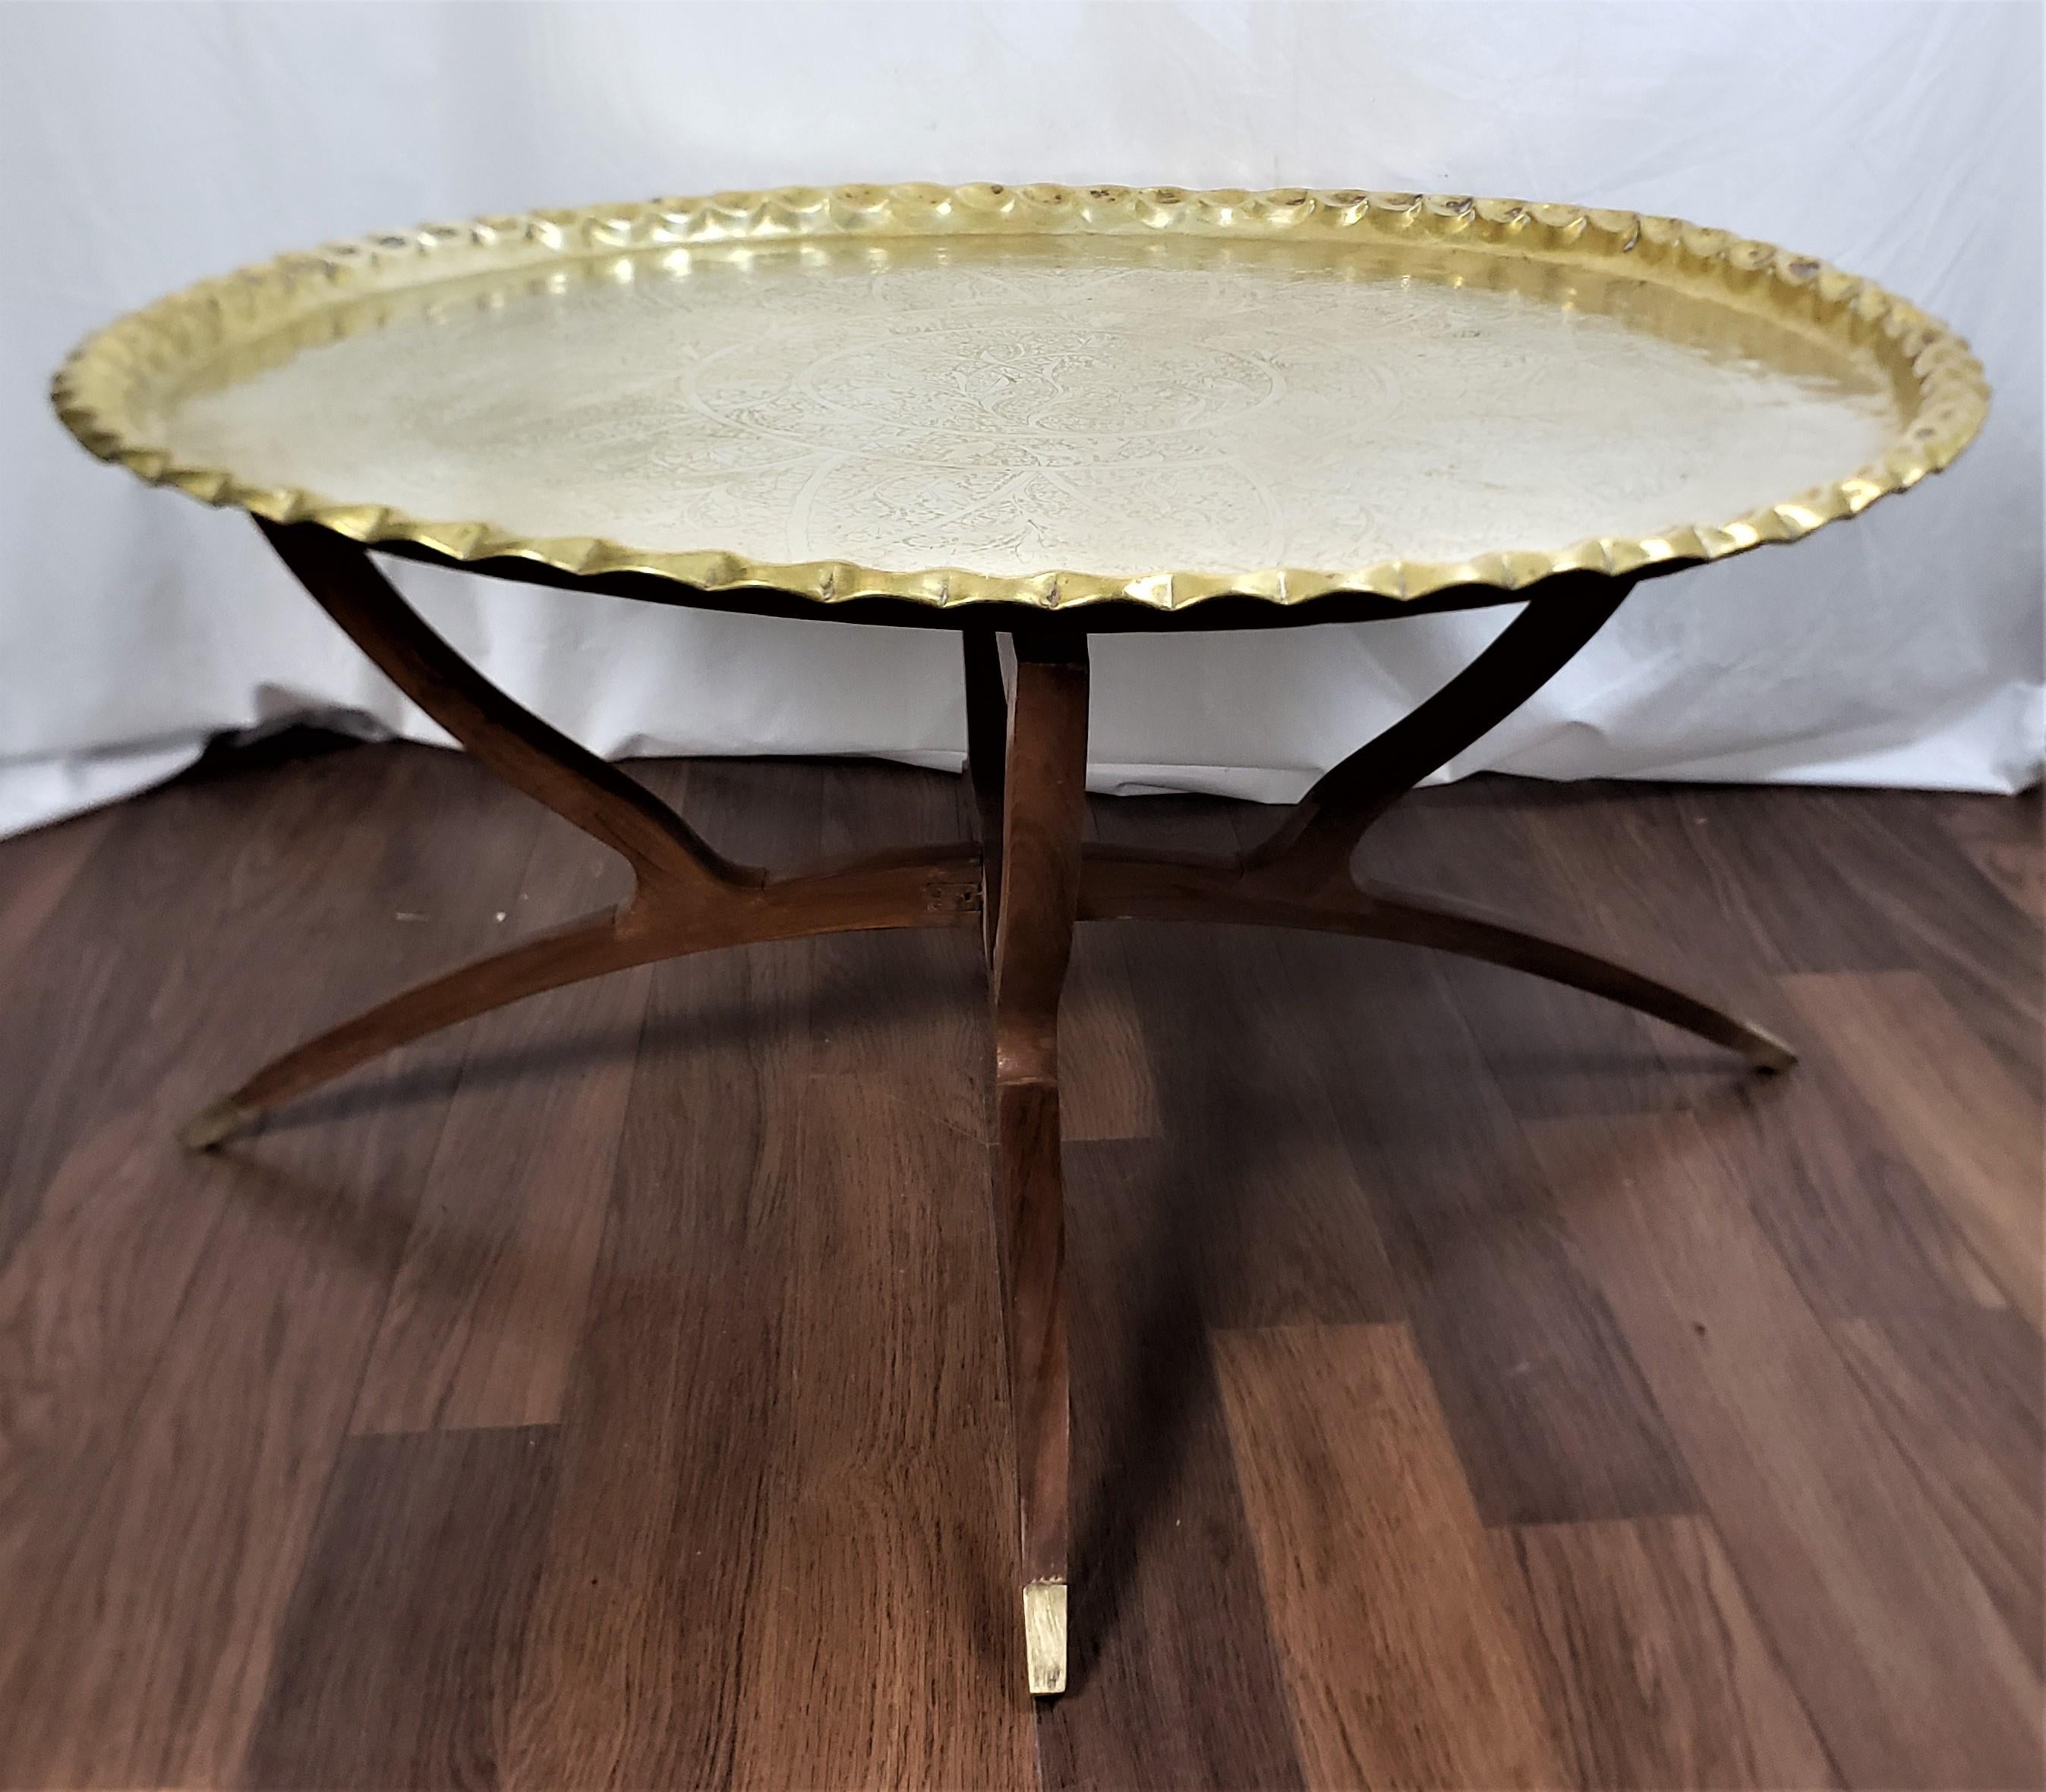 This antique tray table is unsigned, but presumed to have originated from India and date to approximately 1920 and done in the period Angro-Indian style. The hand-crafted tray is composed of brass with an engraved medallion in the center, and a